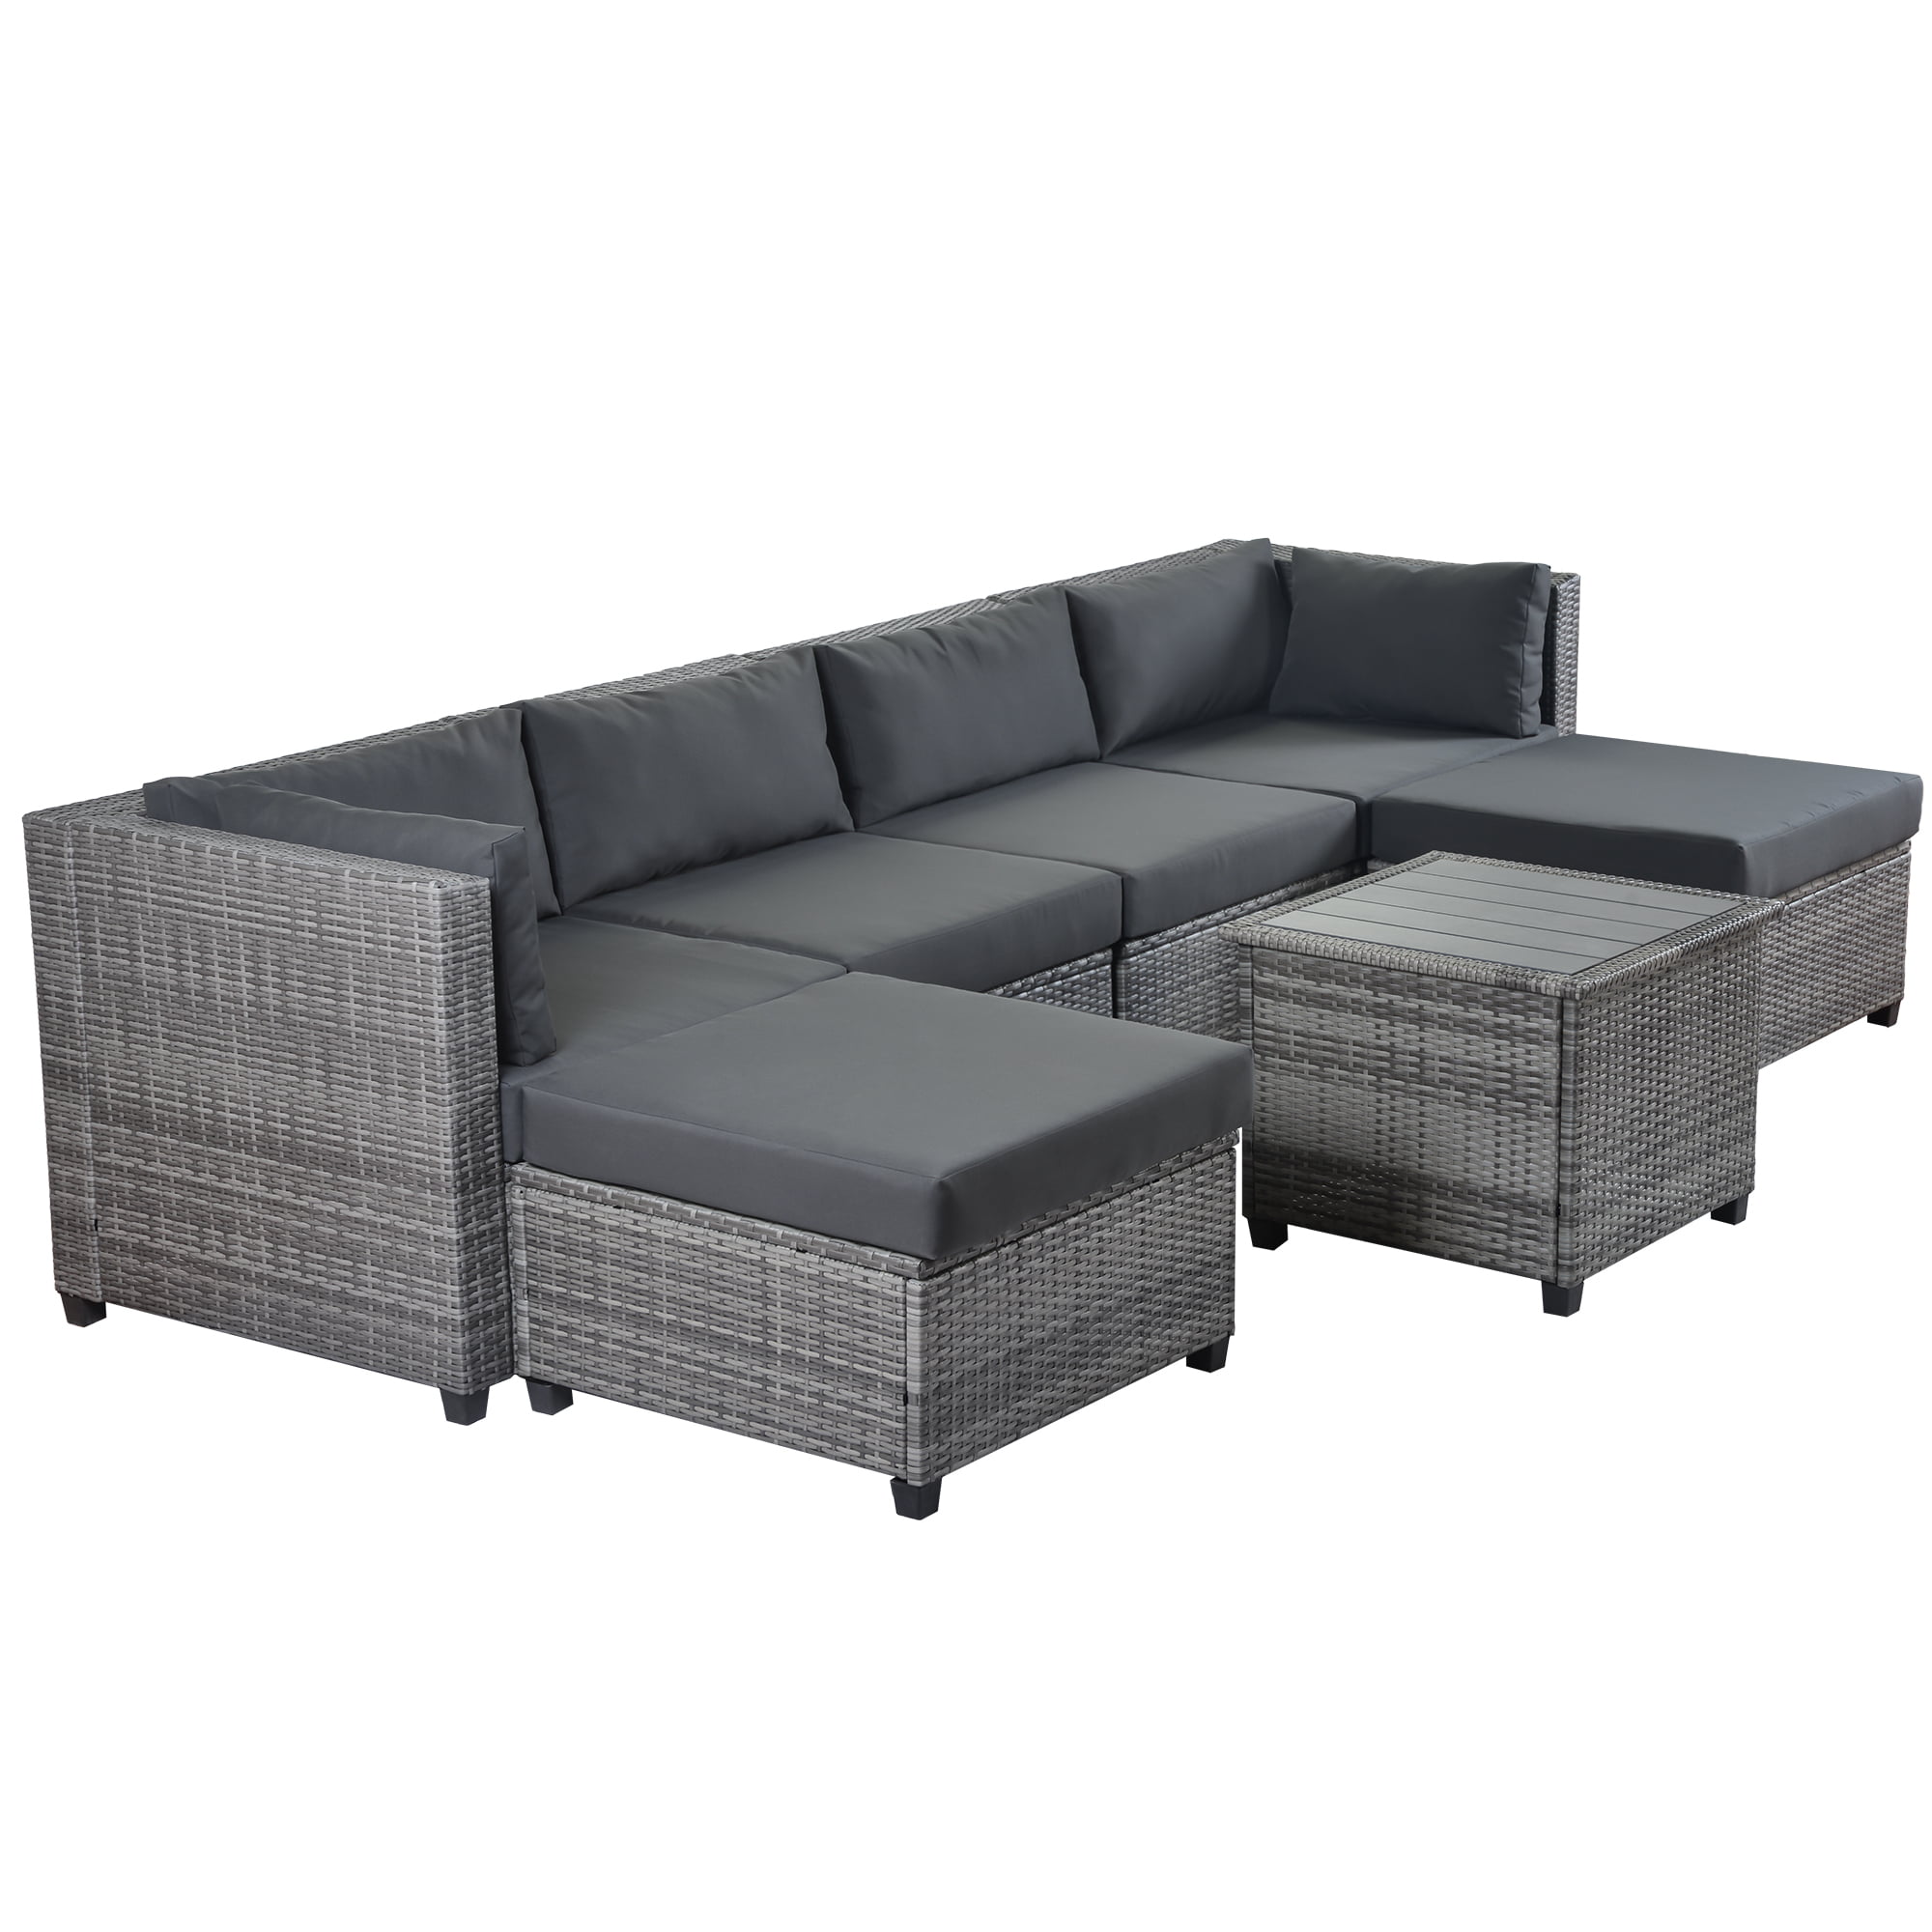 Clearance! Patio Sectional Conversation Sets, 7 Pieces Outdoor Wicker Patio Furniture Set with ...